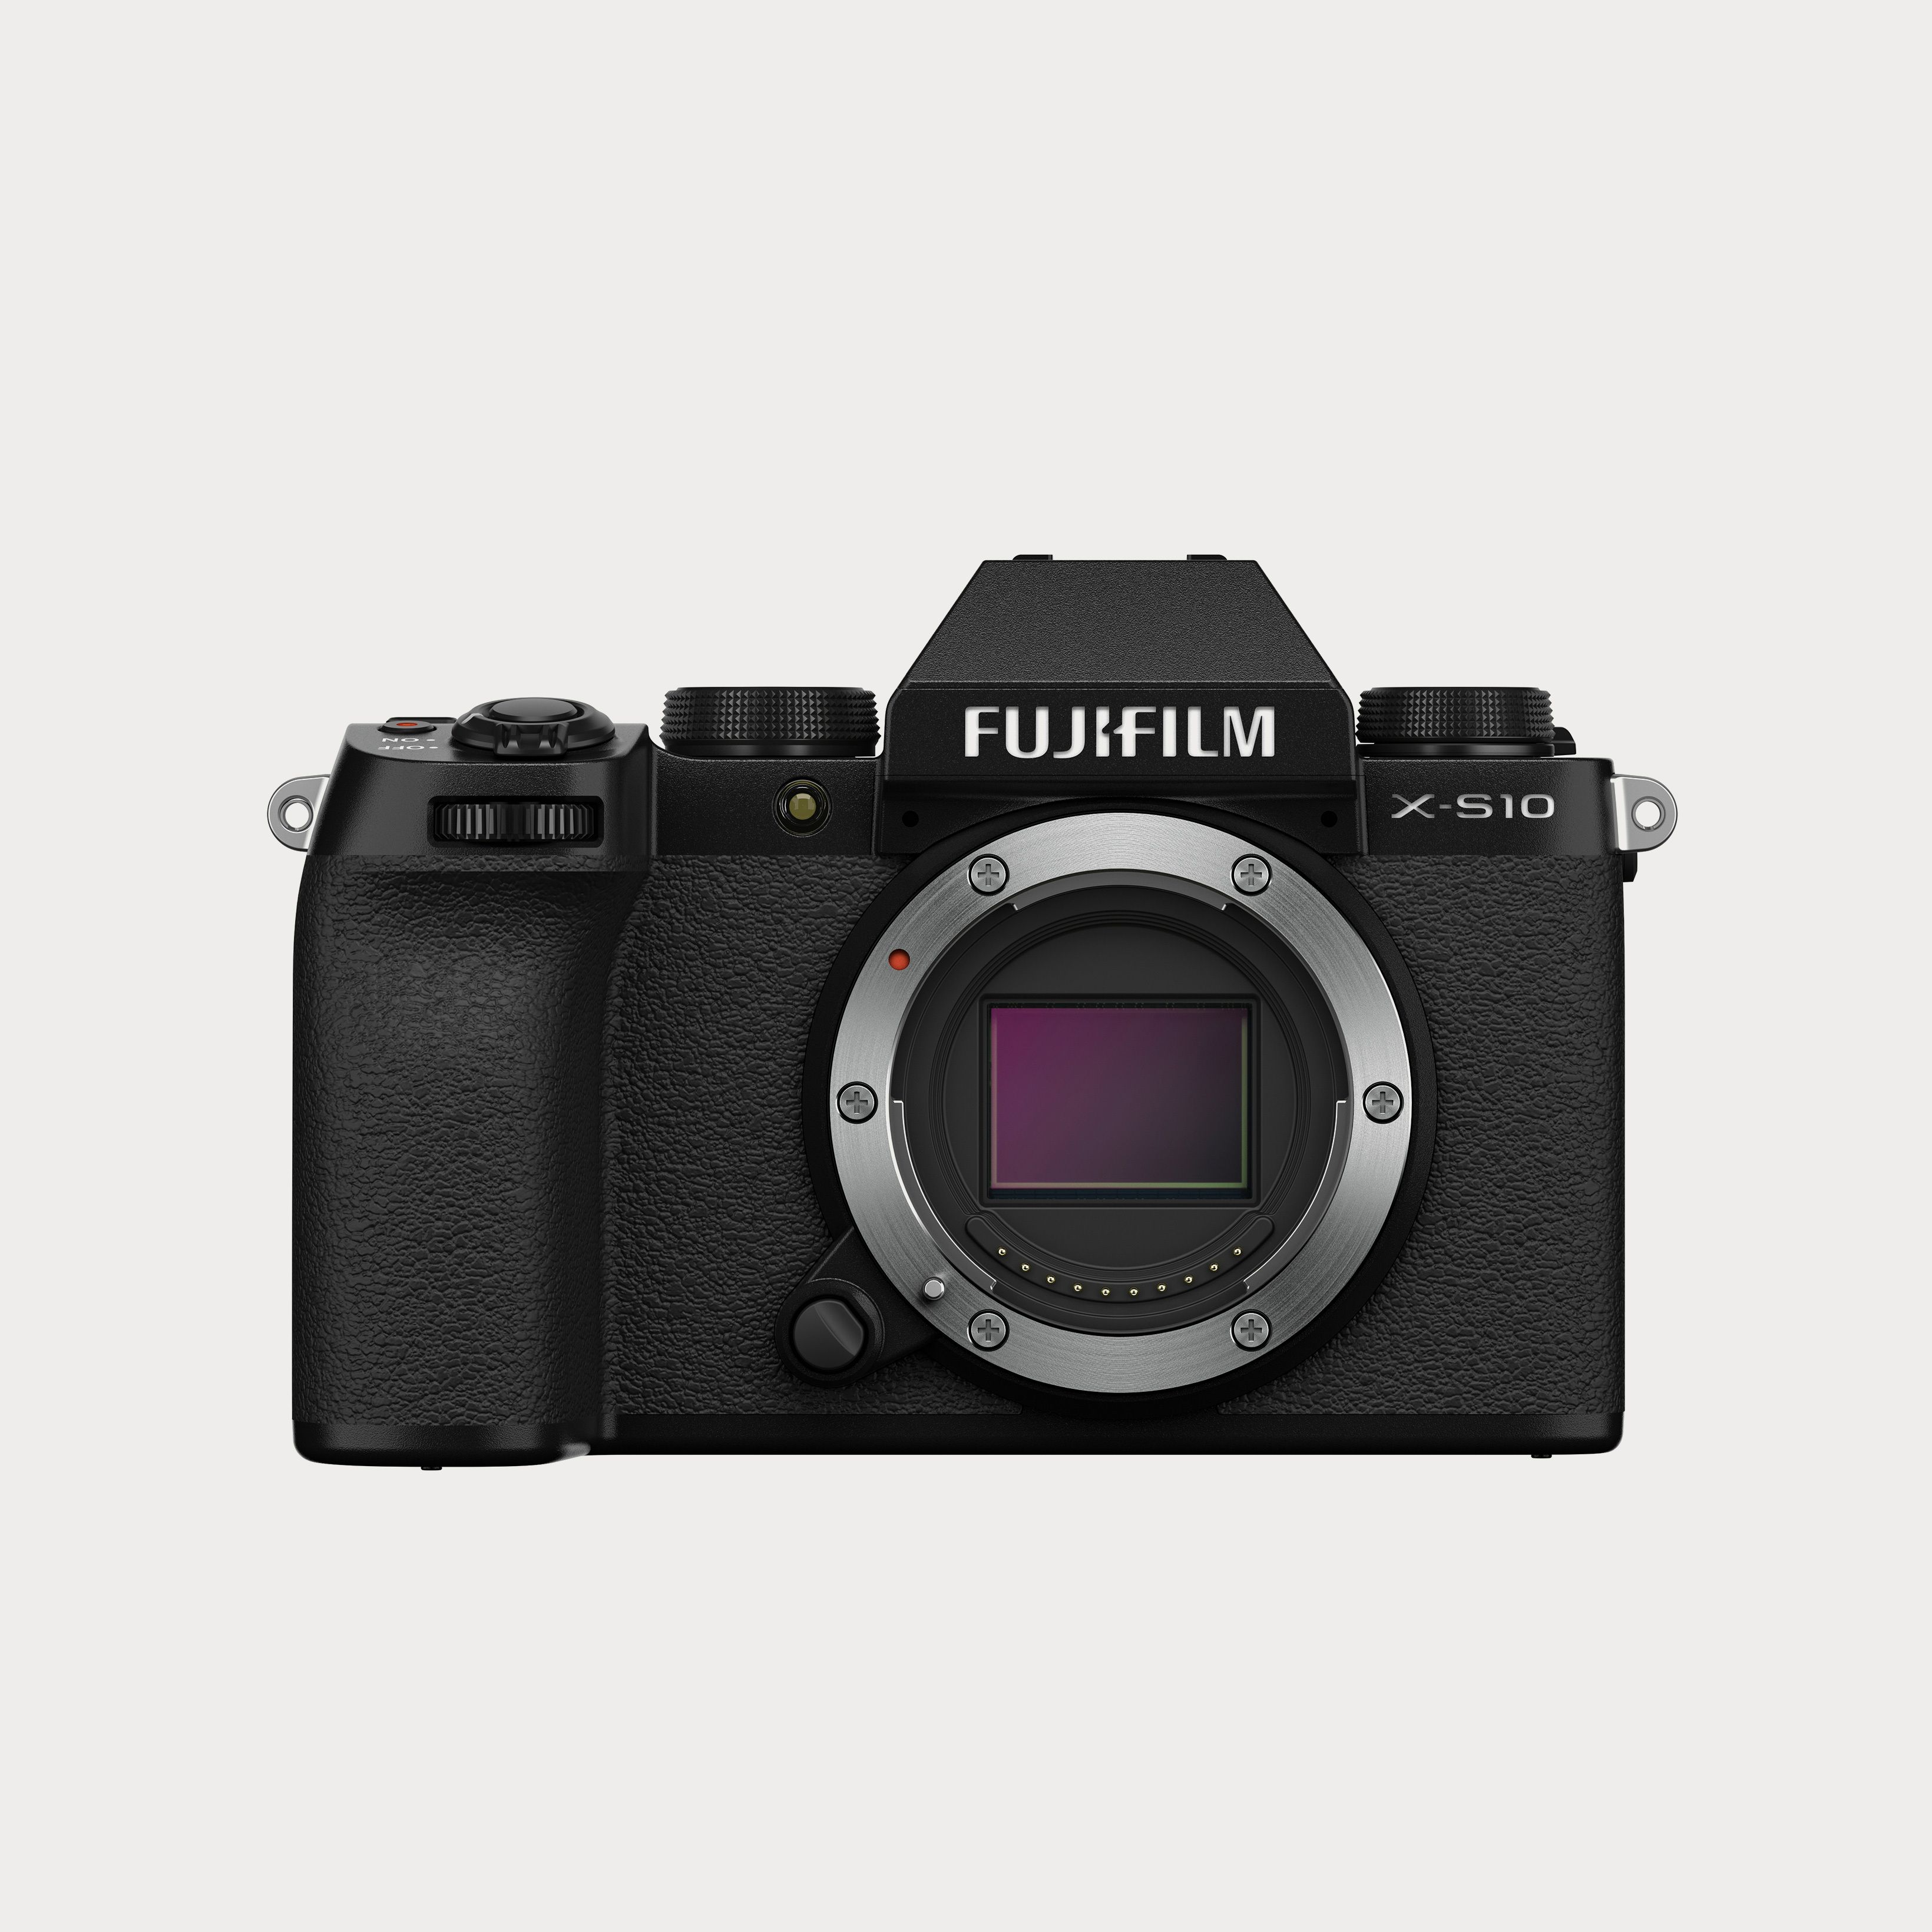 The Fujifilm X-S10 Review | Moment